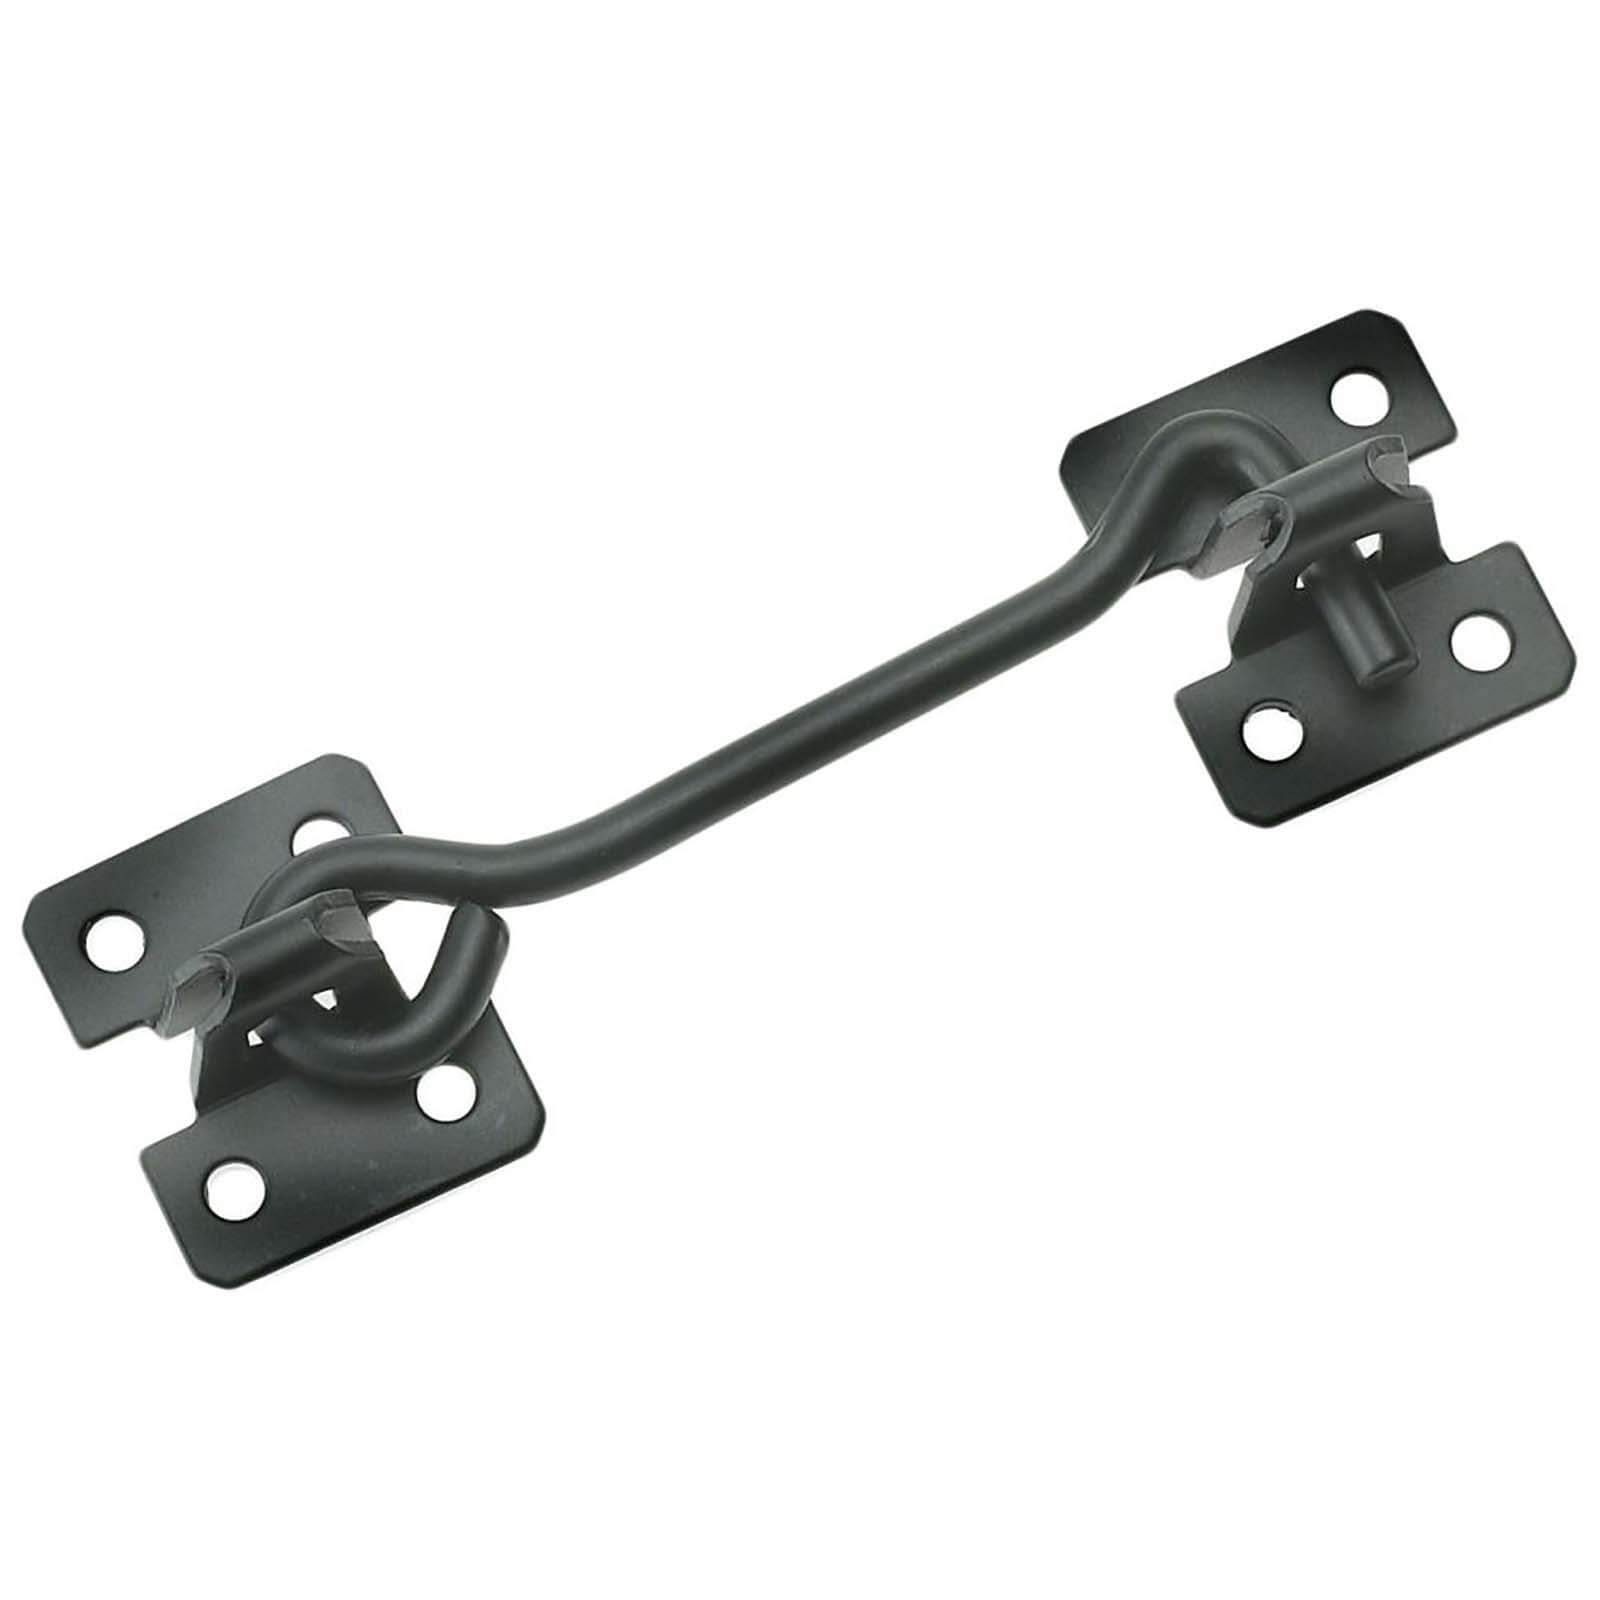 Photo of Wire Cabin Hook - Black - 76mm